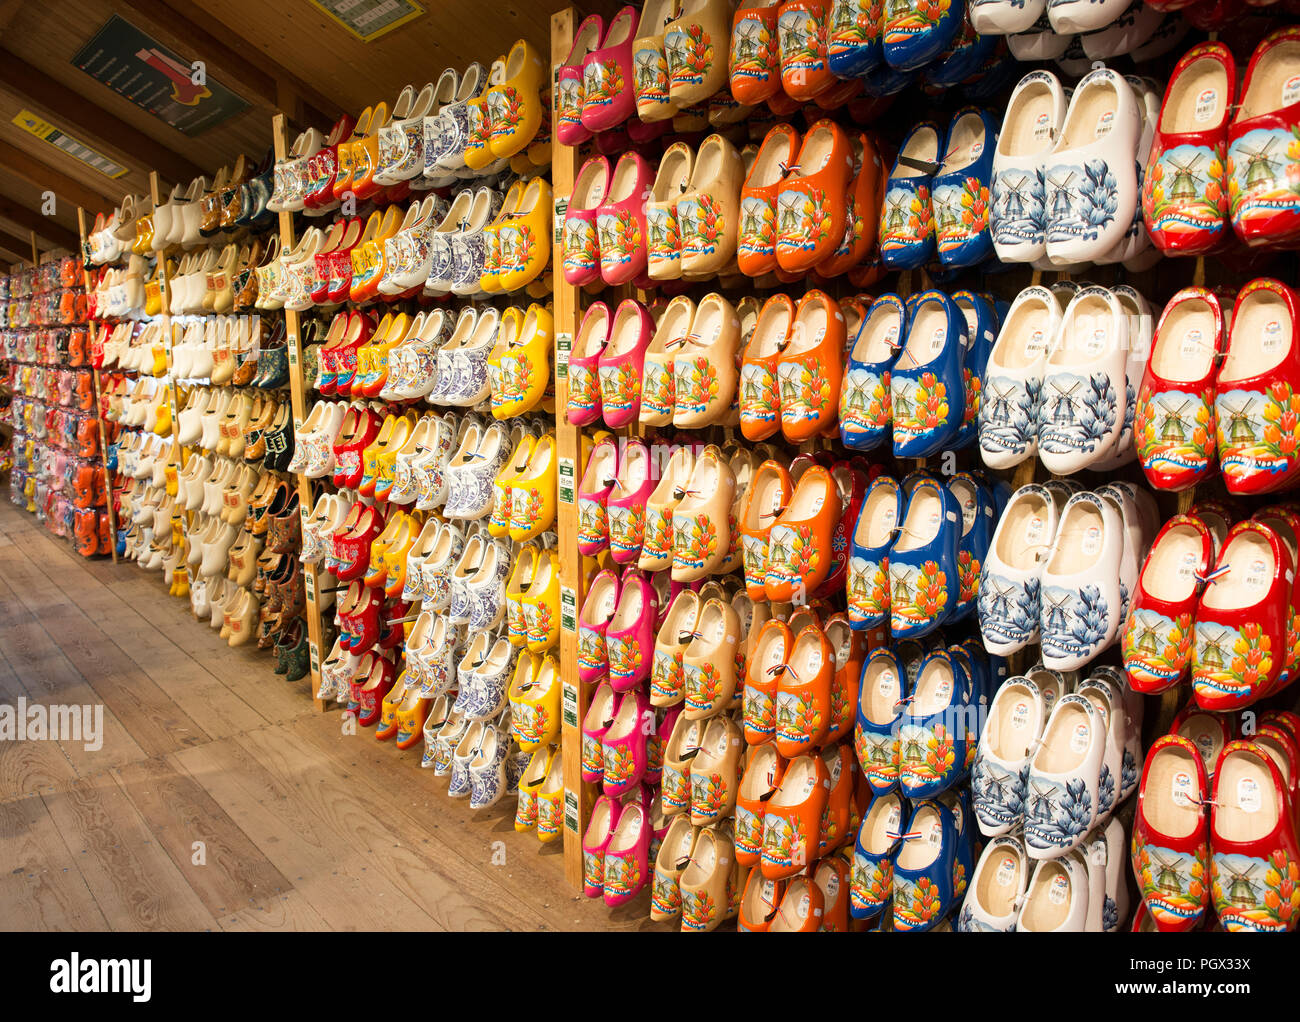 Zaandam,Holland,28-aug-2018:shop with all kinds of wooden shoes in zaandam in holland, zaandam is famous of its old dutch traditional houses and products like these wooden shoes Stock Photo